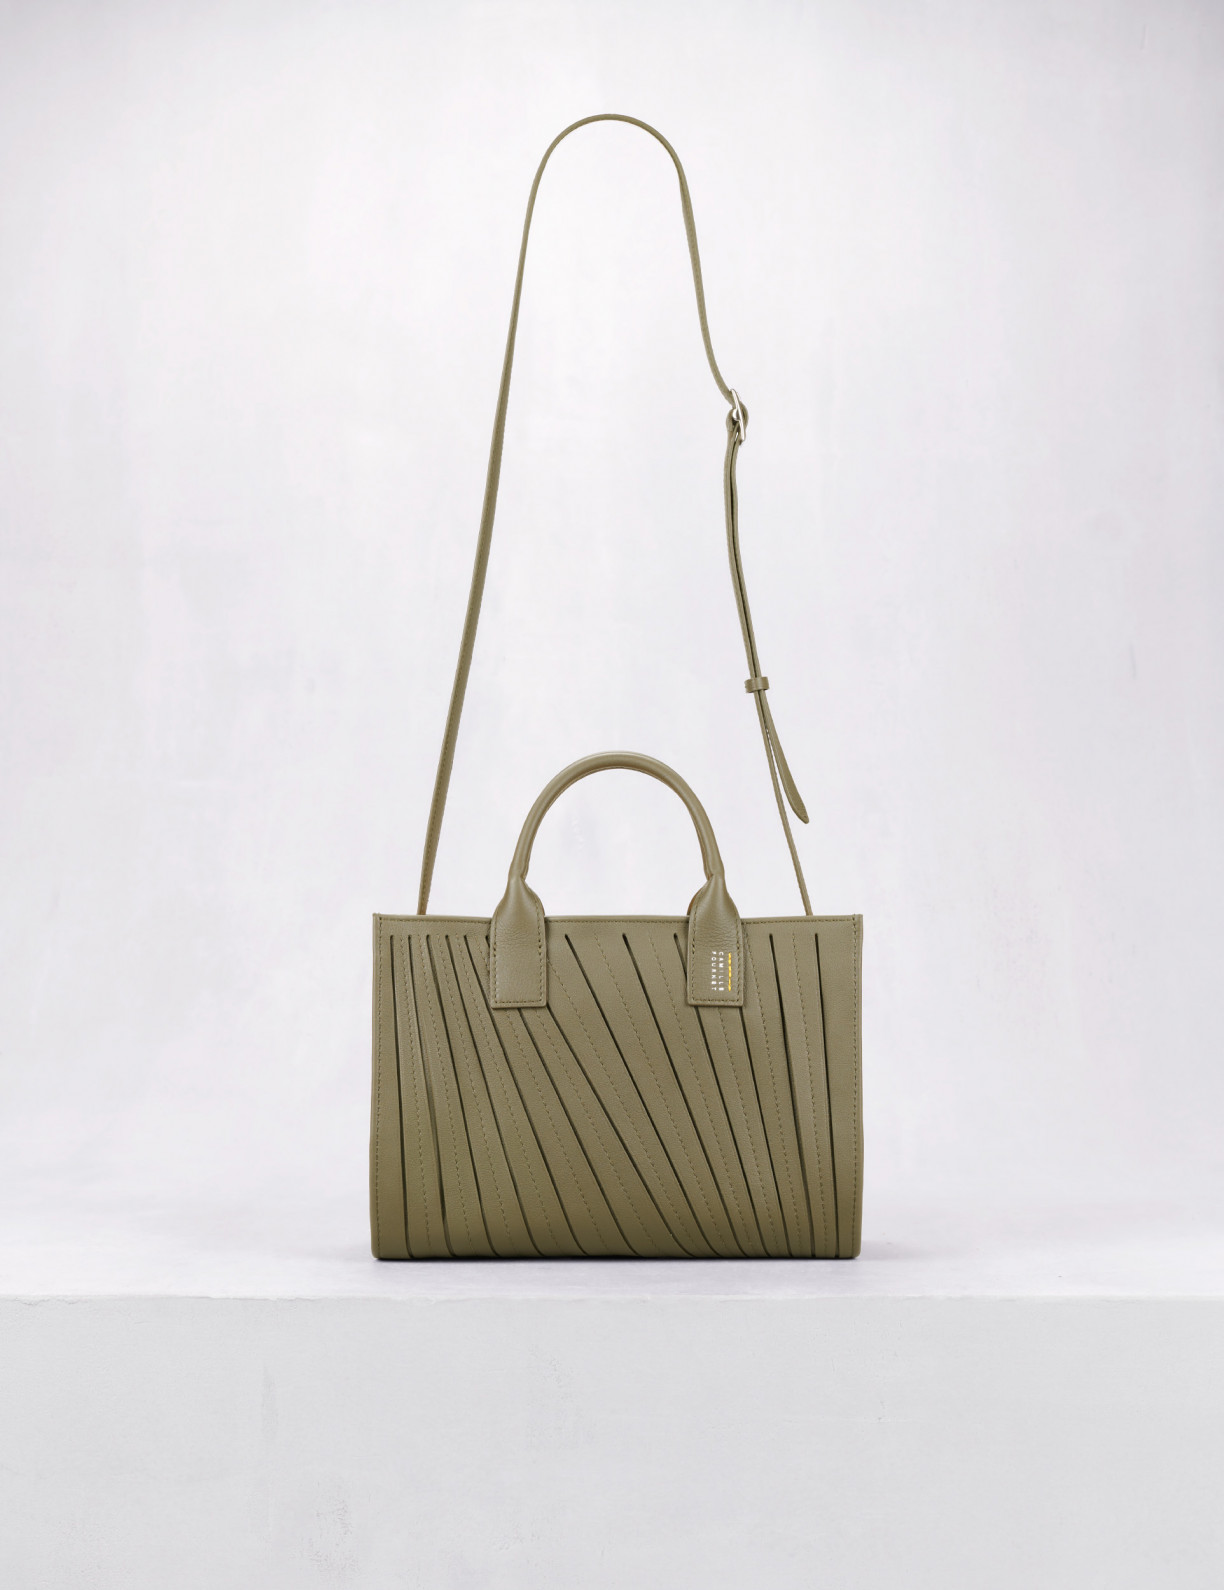 32.15 Small pleated shopping bag